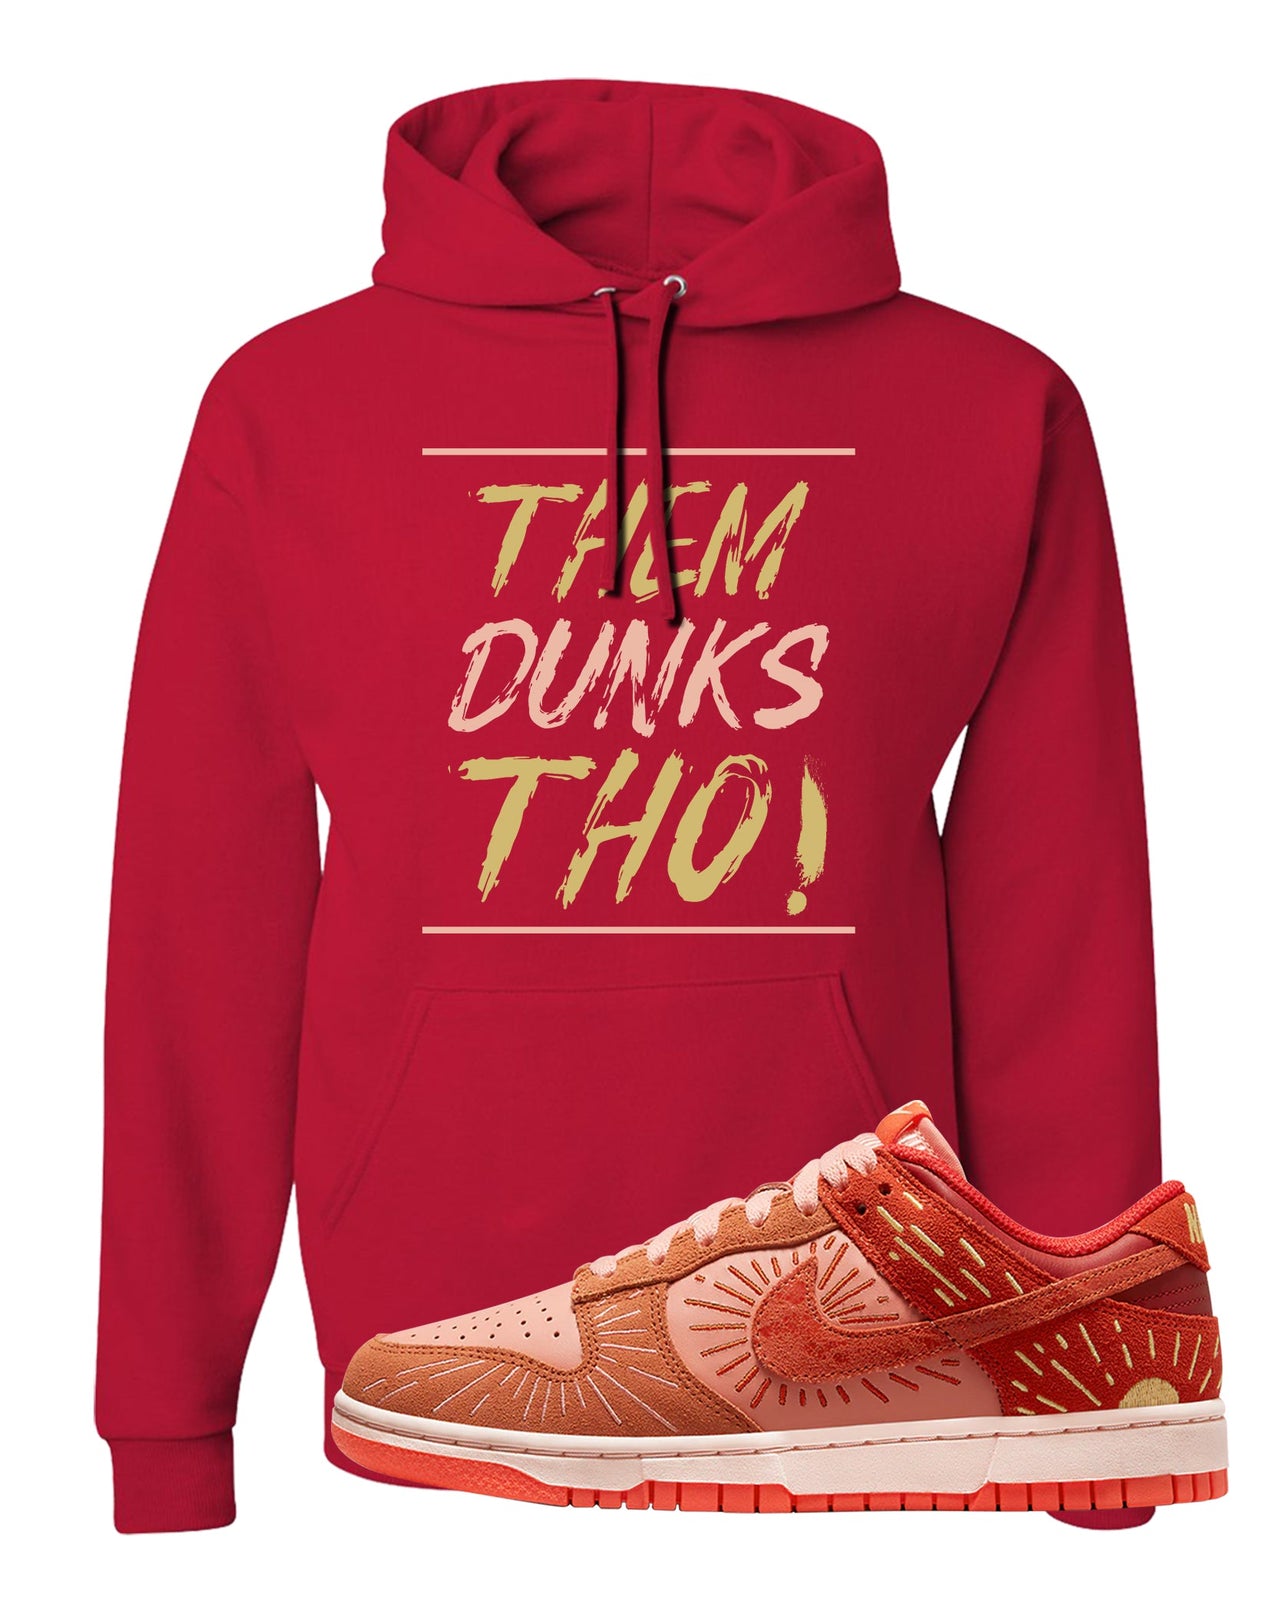 Solstice Low Dunks Hoodie | Them Dunks Tho, Red